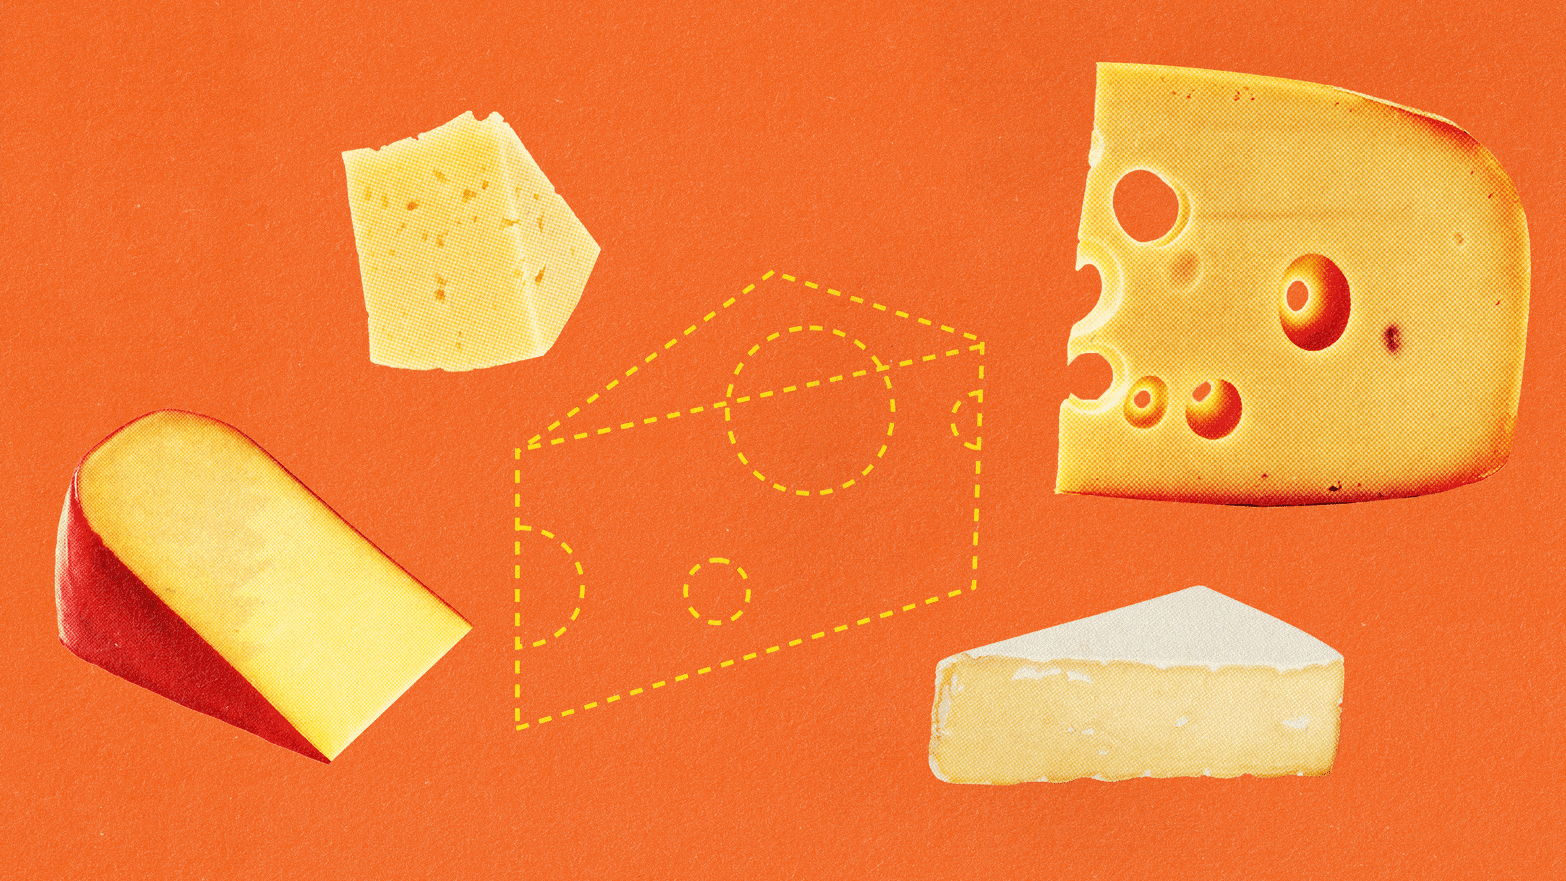 Four pieces of cheese surrounding the outline of a missing fifth piece of cheese.